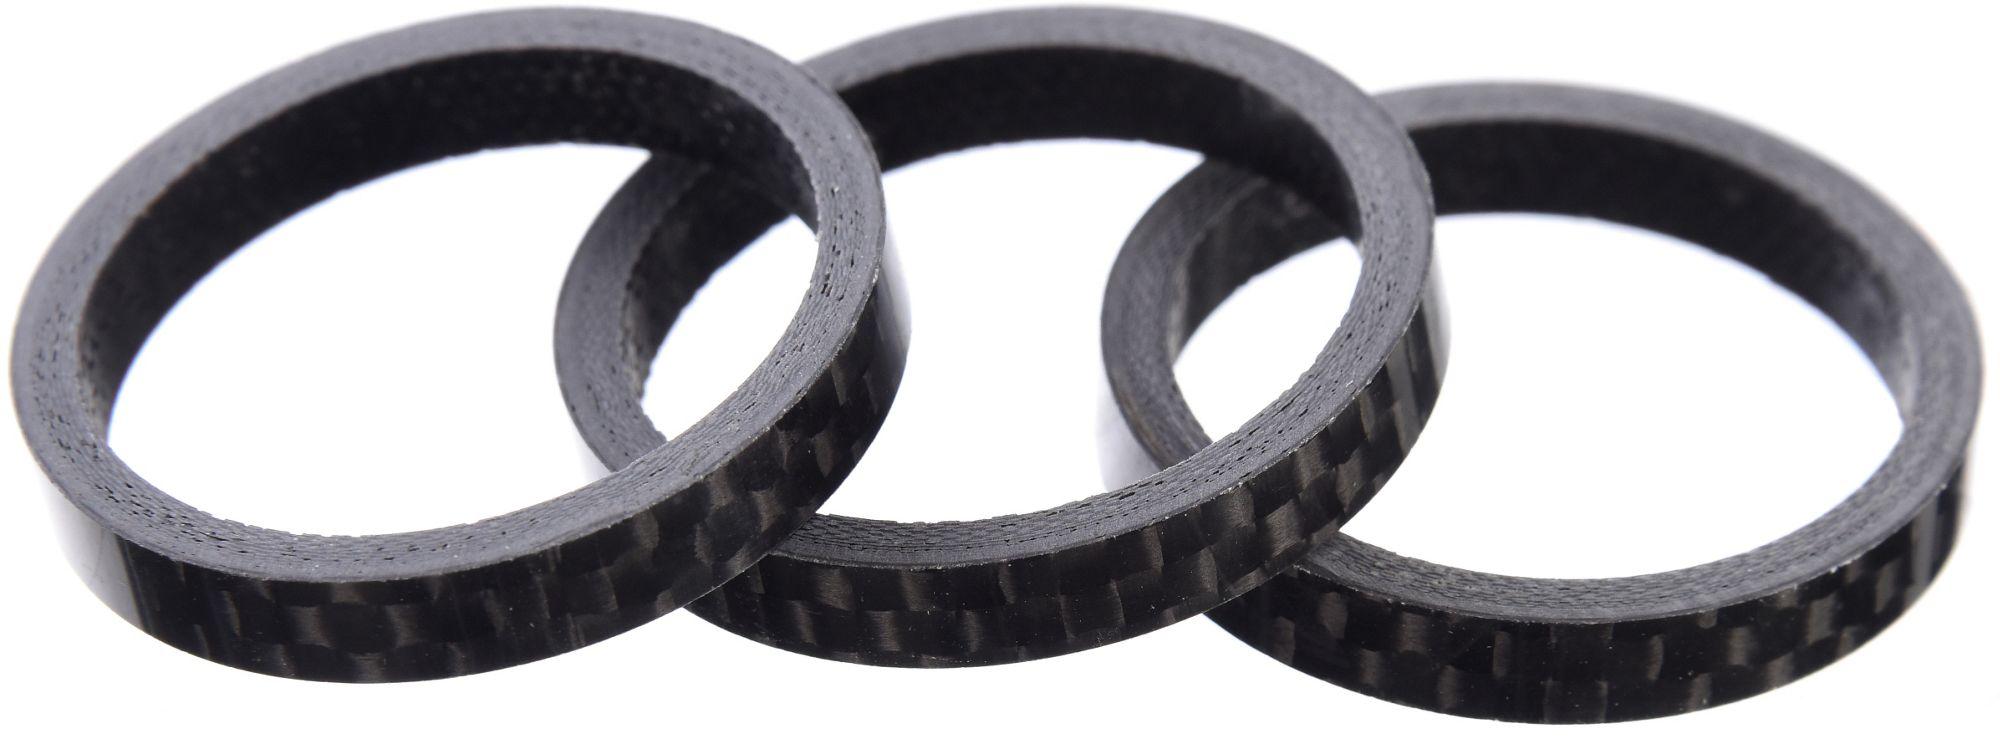 Brand-x Carbon Headset Spacers (3x5mm)  Black